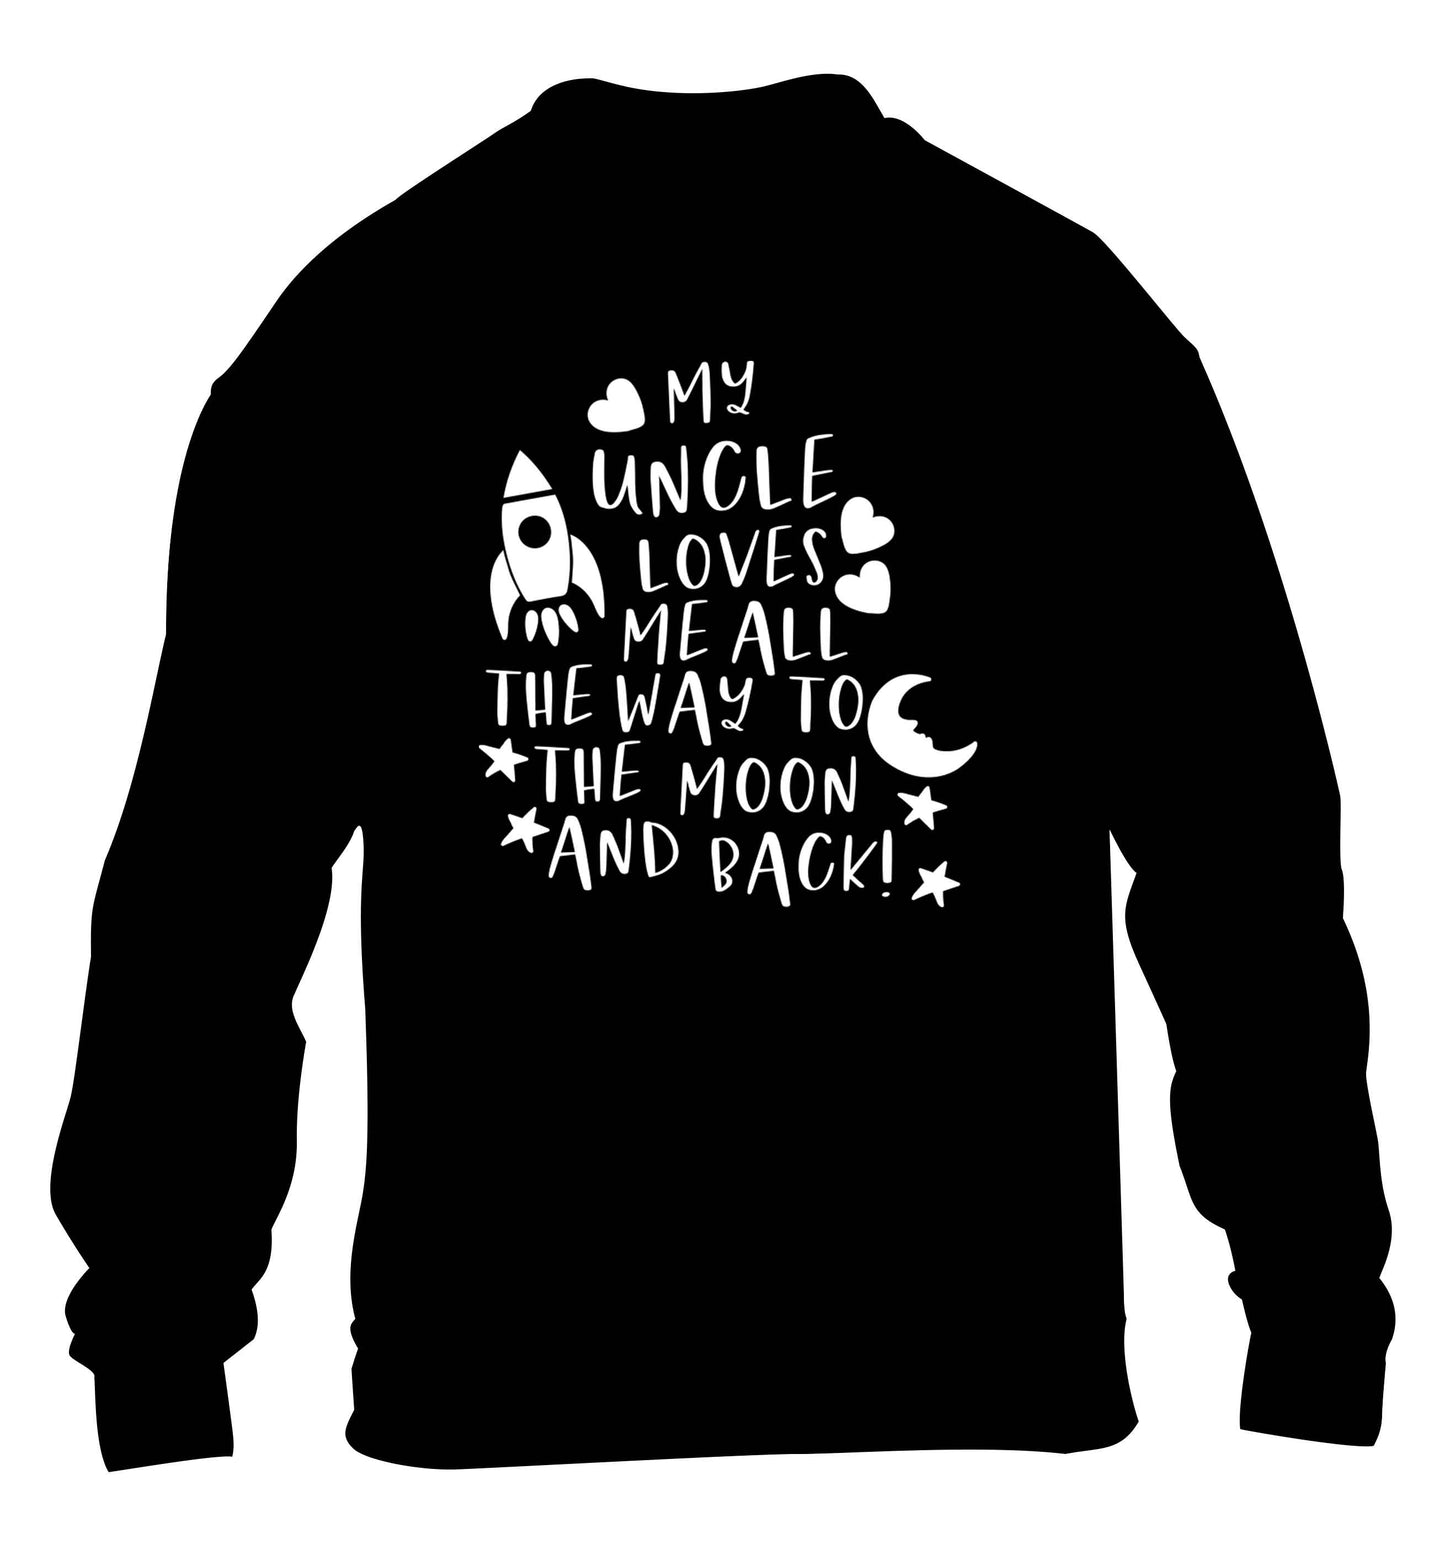 My uncle loves me all the way to the moon and back children's black sweater 12-13 Years